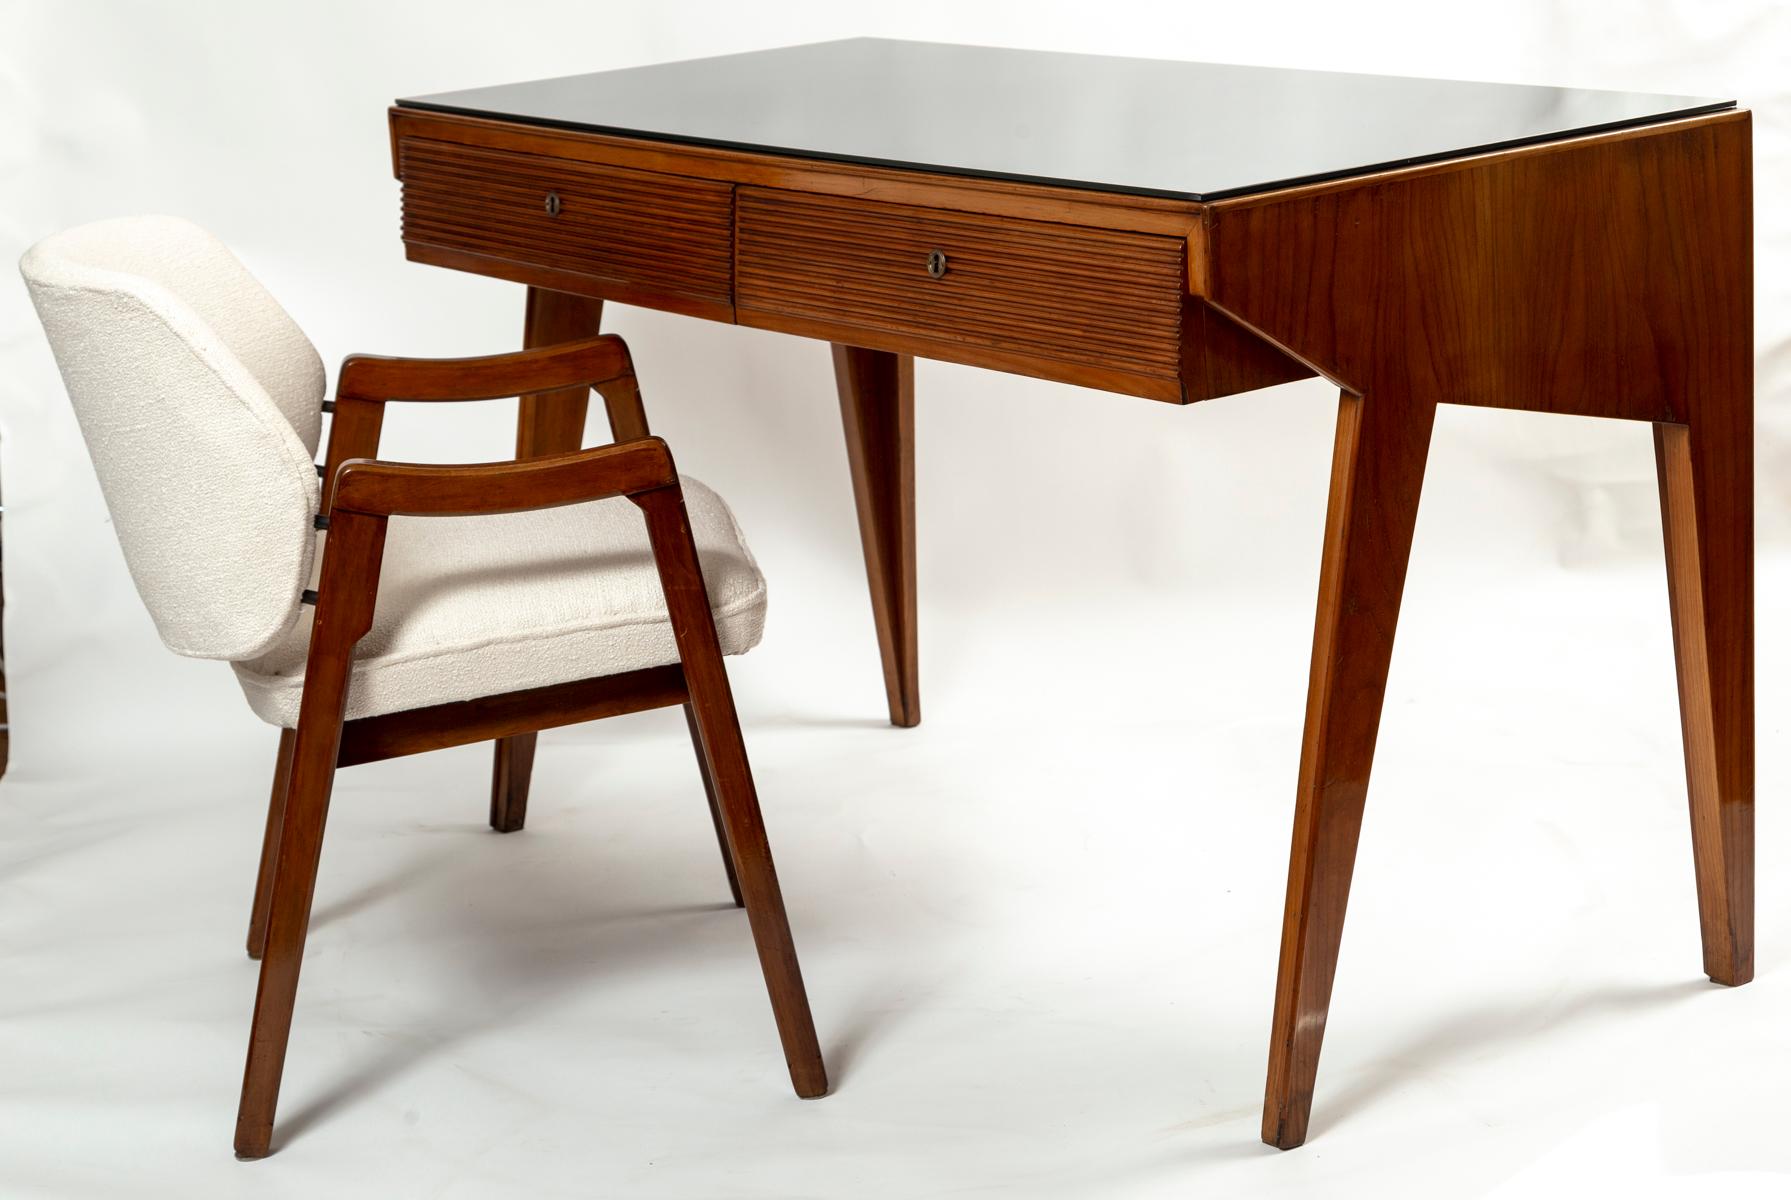 Wonderful Modernist fruitwood desk shown with its original grey laminate top which we have covered in a new black glass top above an angular base consisting of two grissinato drawers and finishing  on angled legs, note desk is not only finished on